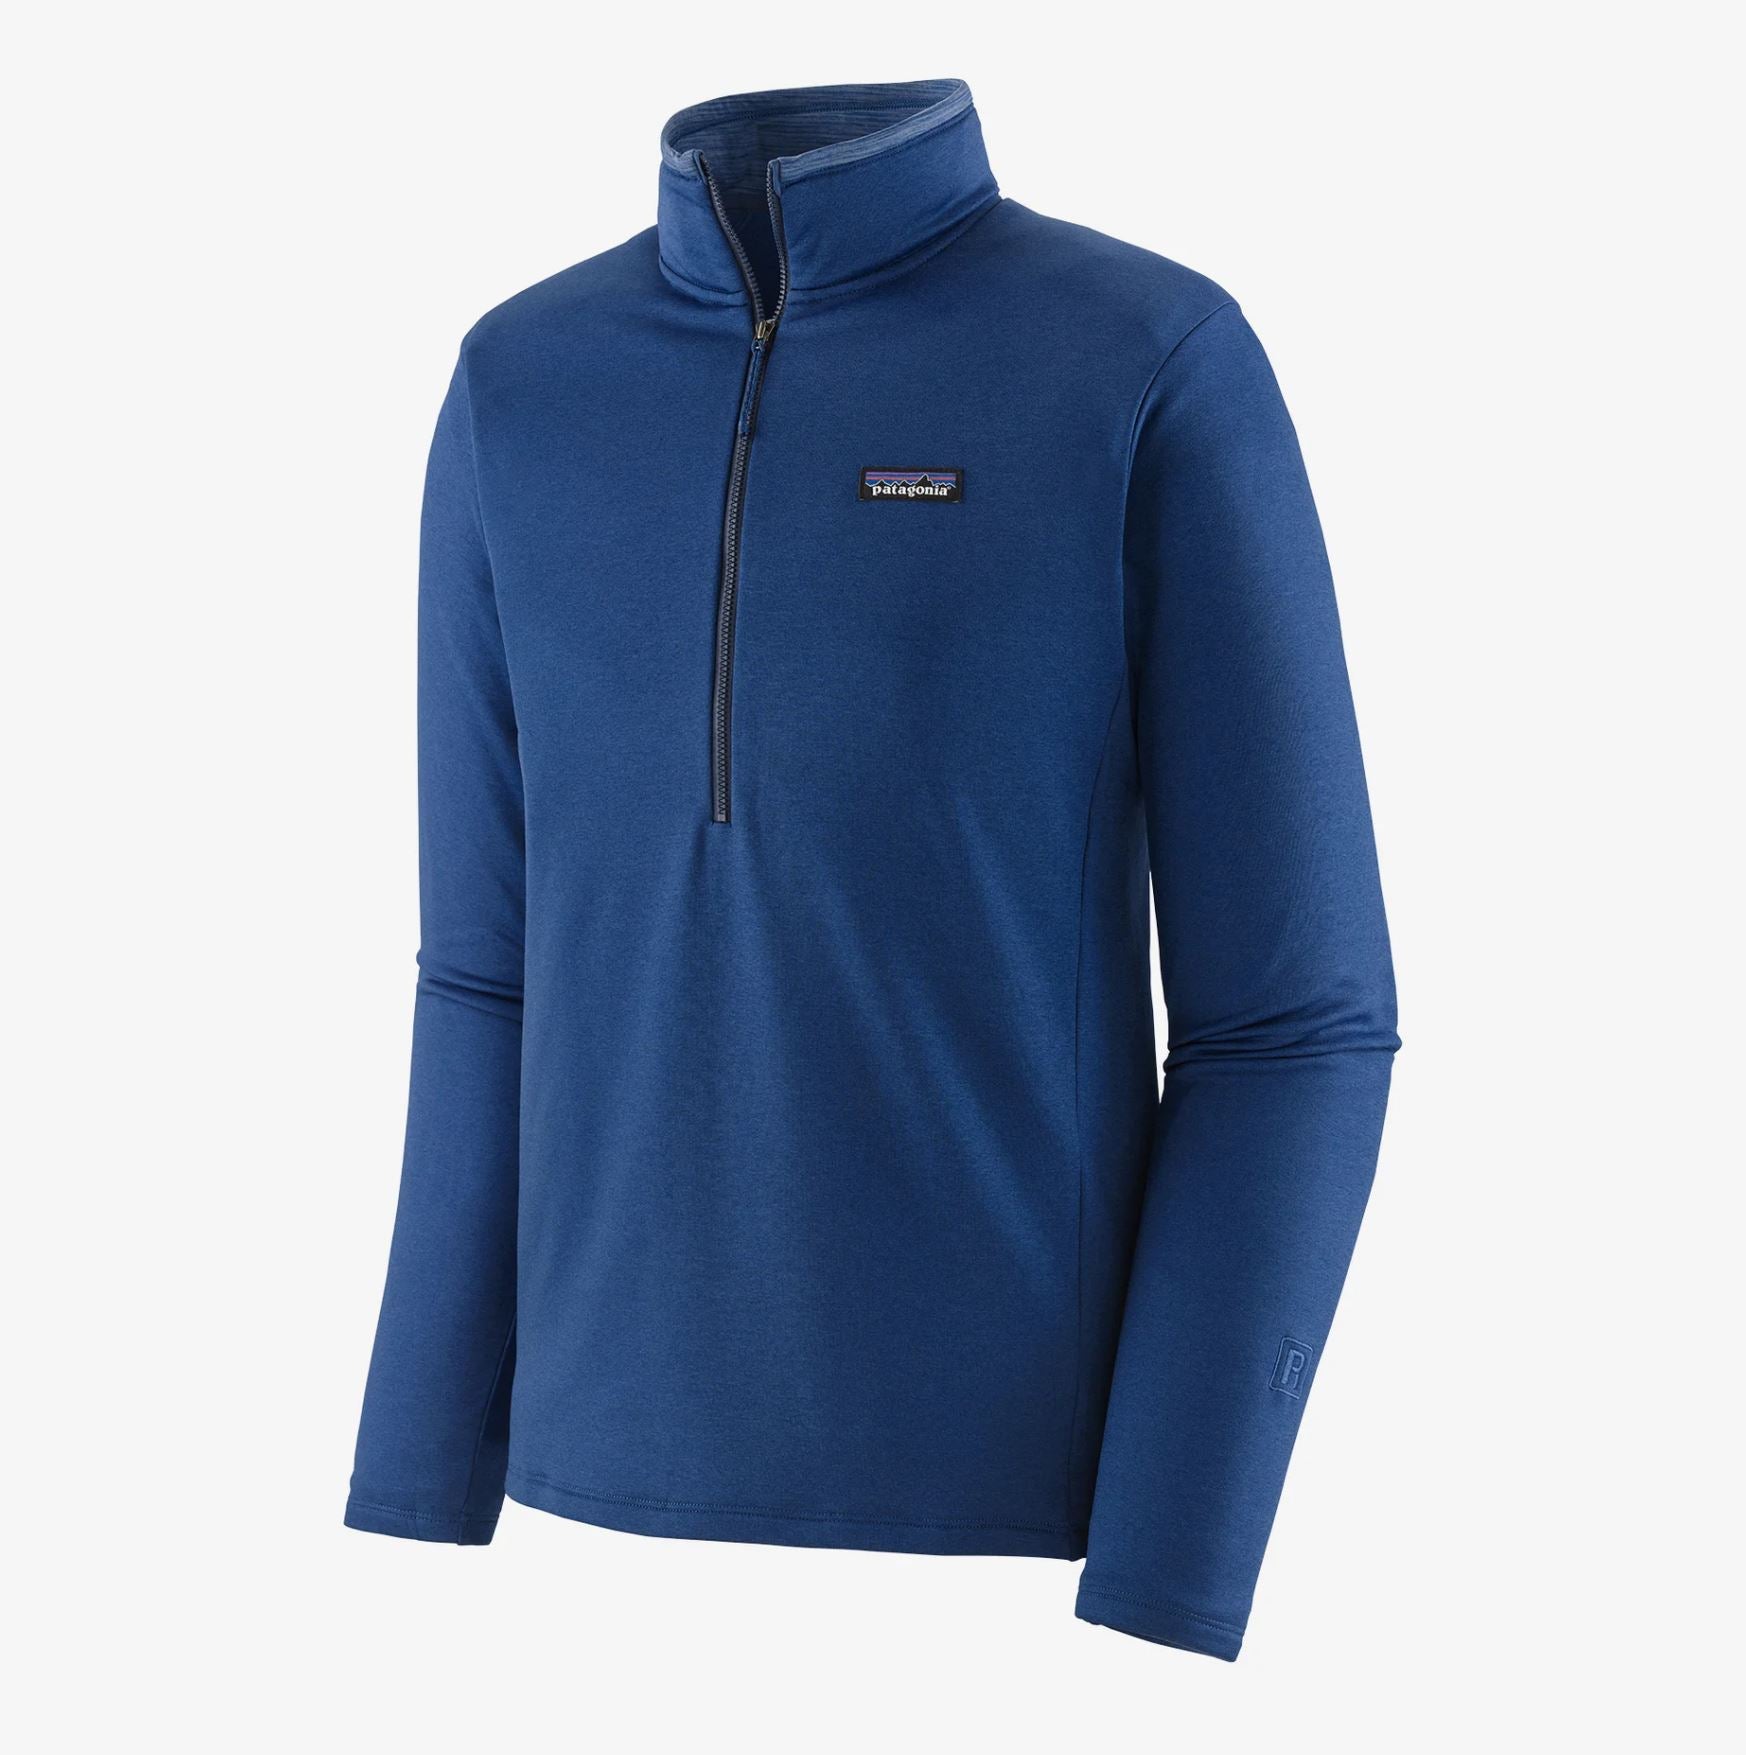 Patagonia R1 Daily Bottoms Women's